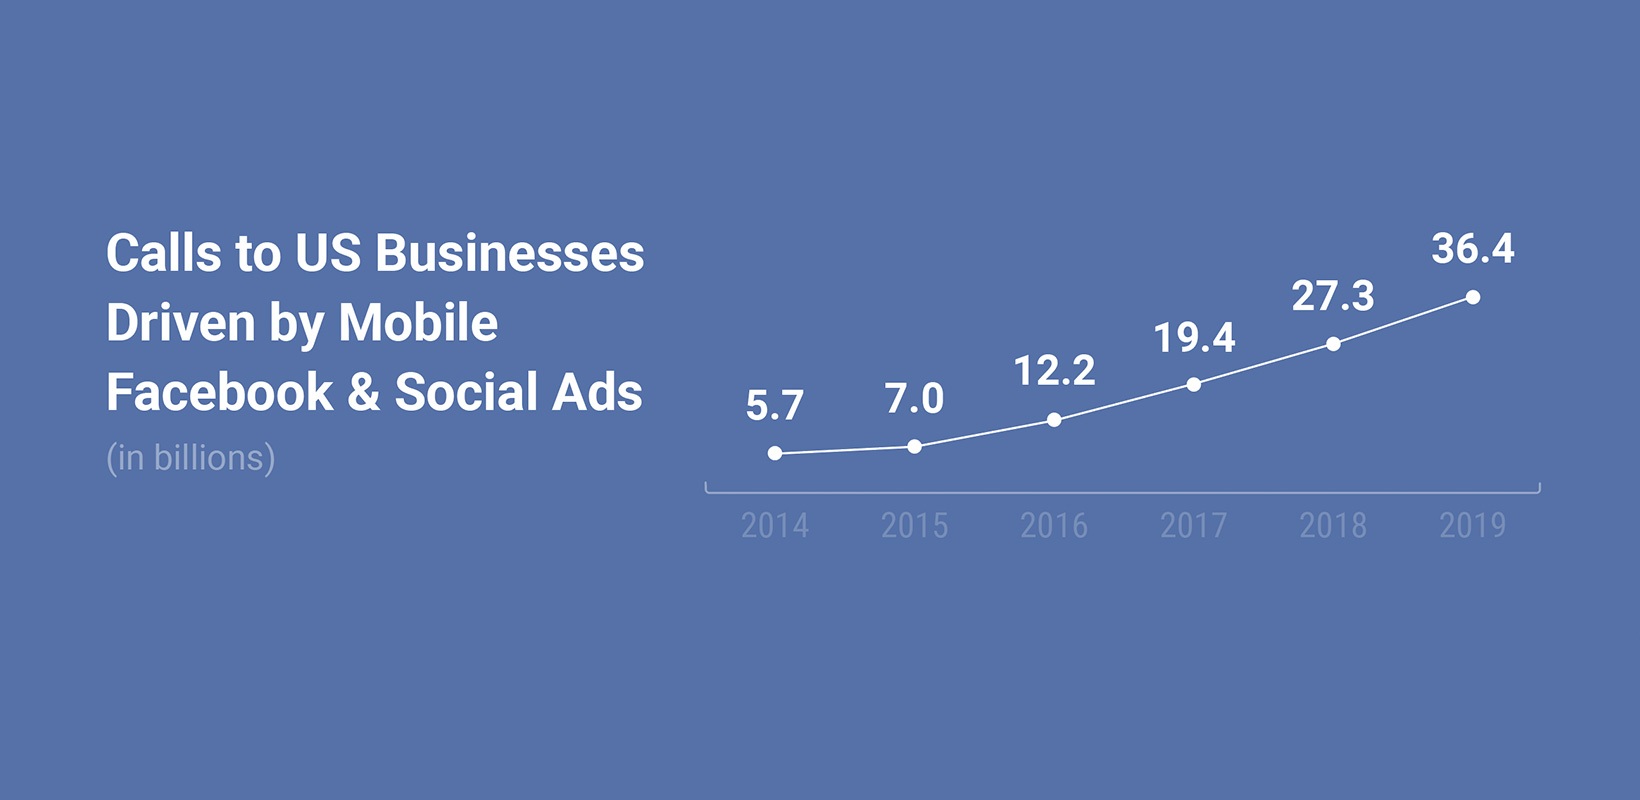 Facebook and social ads are driving an explosion of calls to US businesses